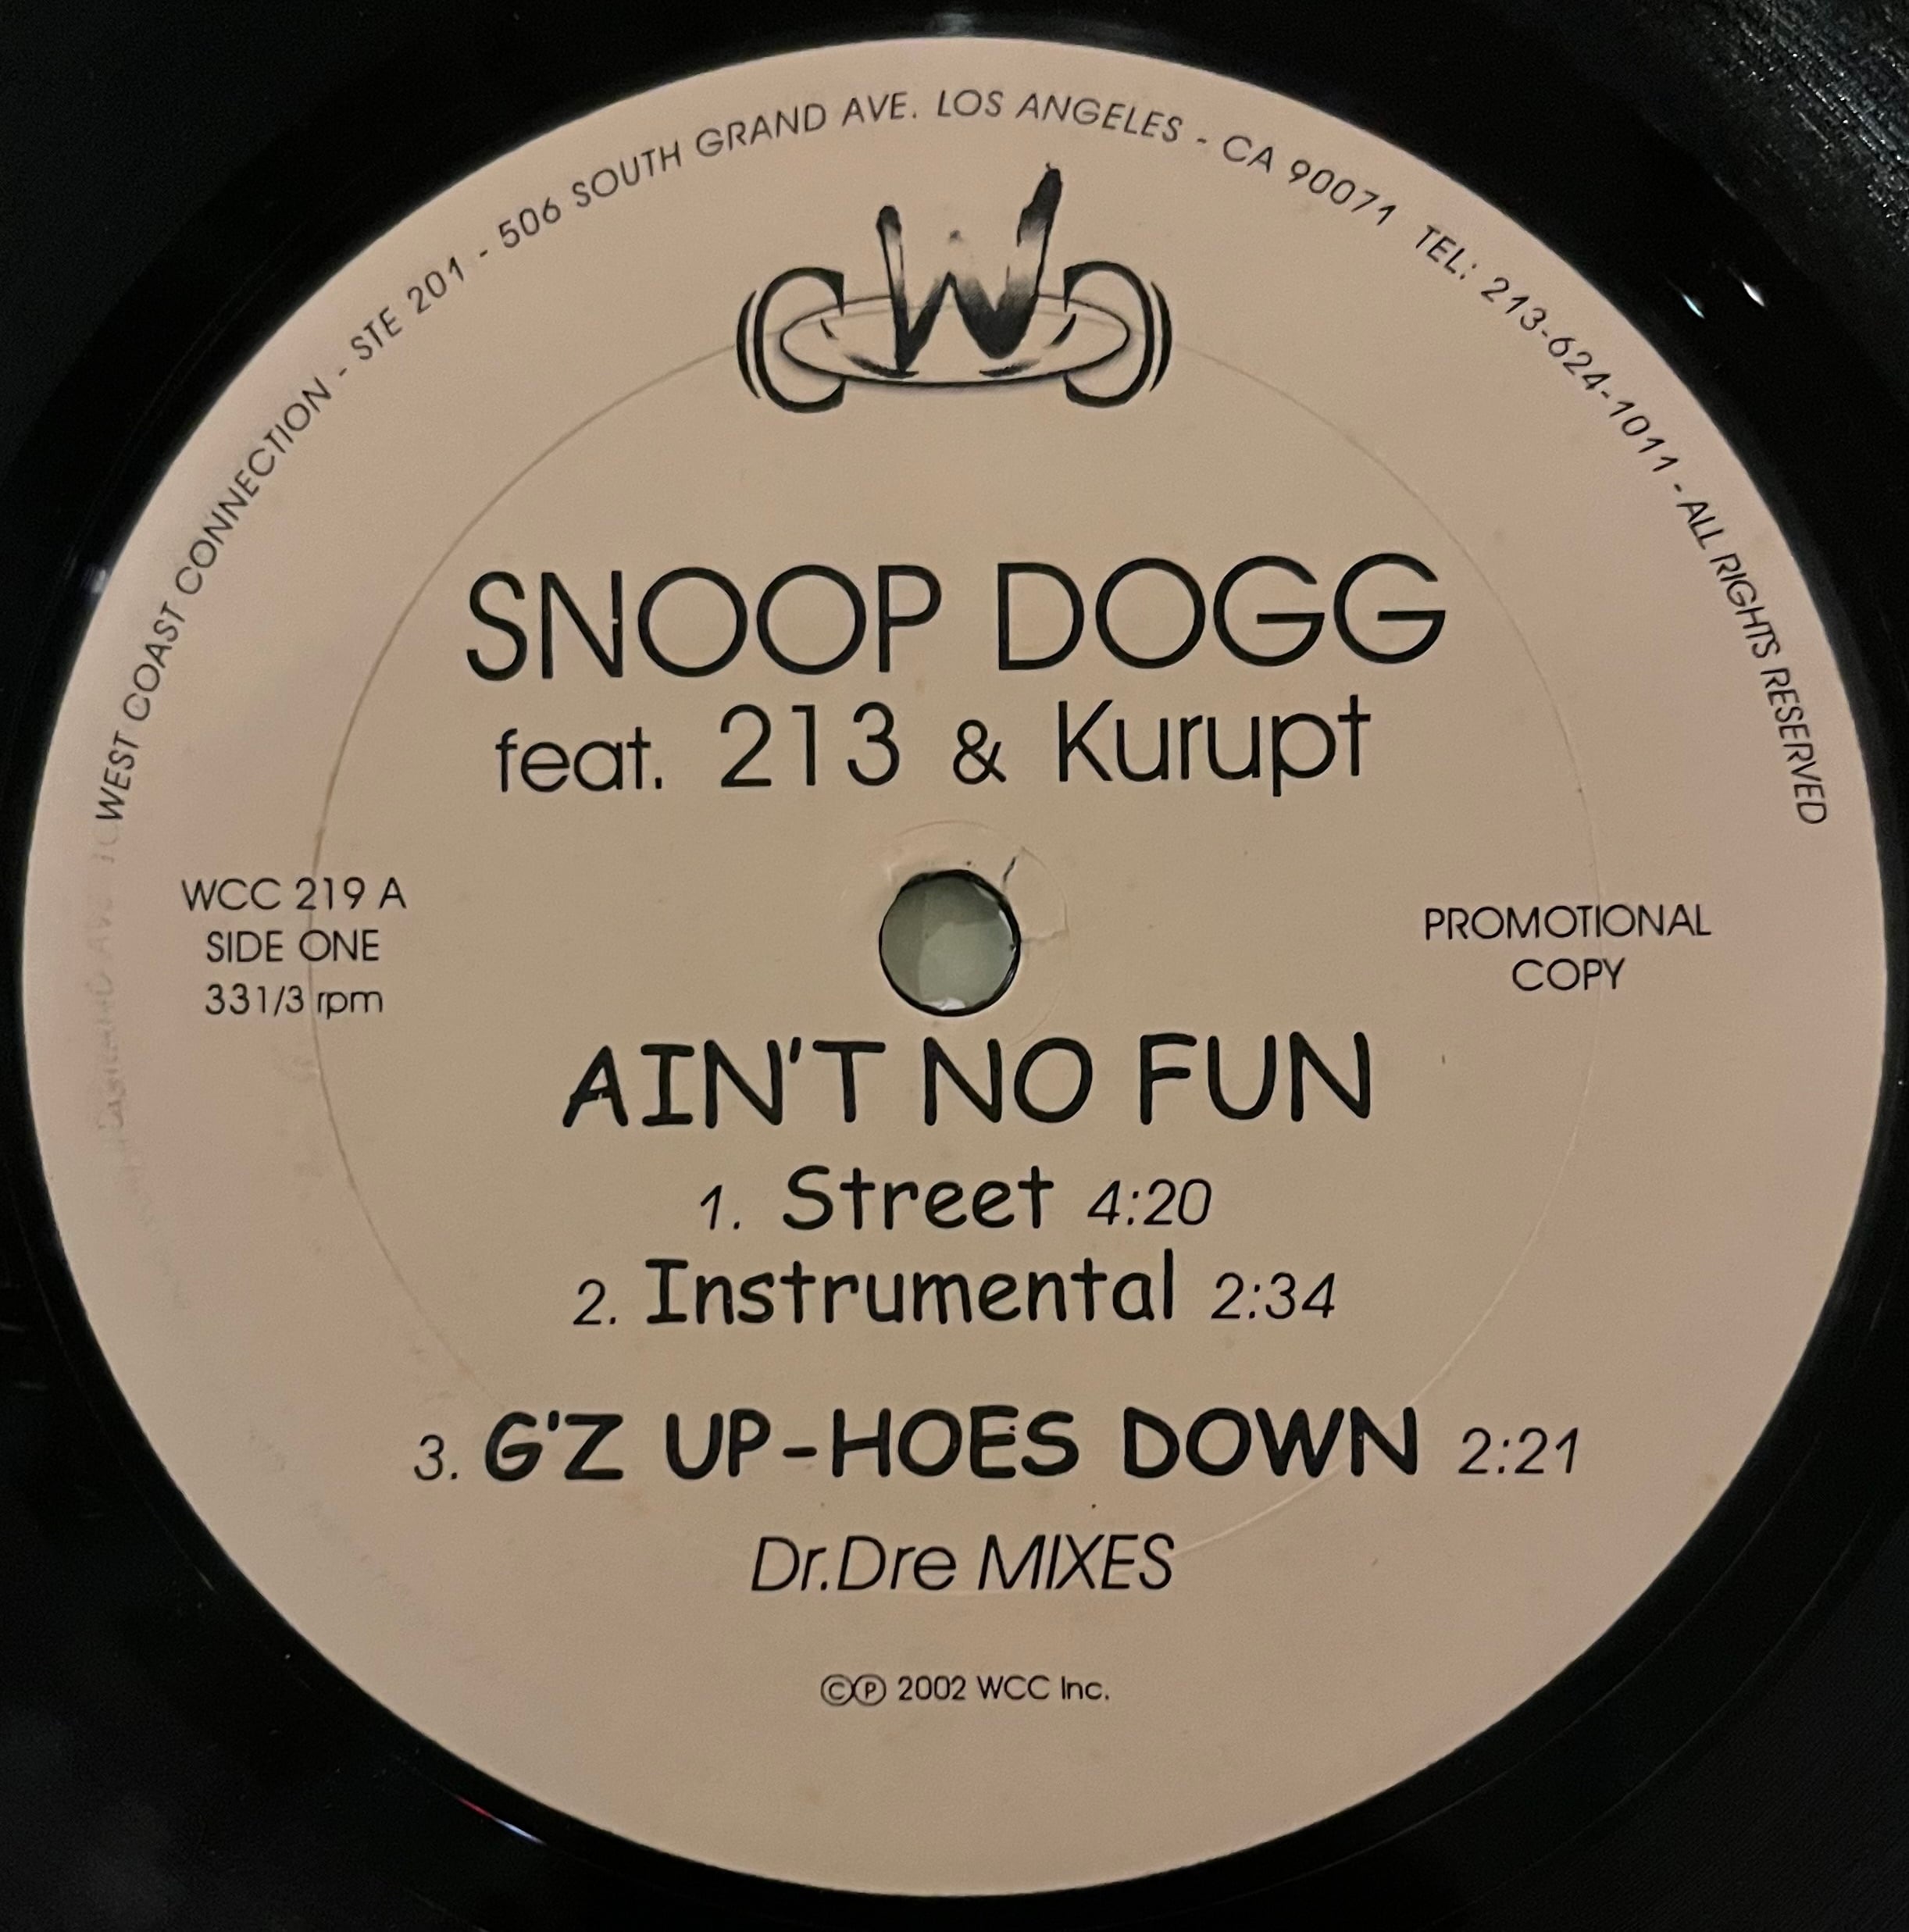 Snoop Dogg – Ain't No Fun / G'z Up-Hoes Down (12") | oleo Records